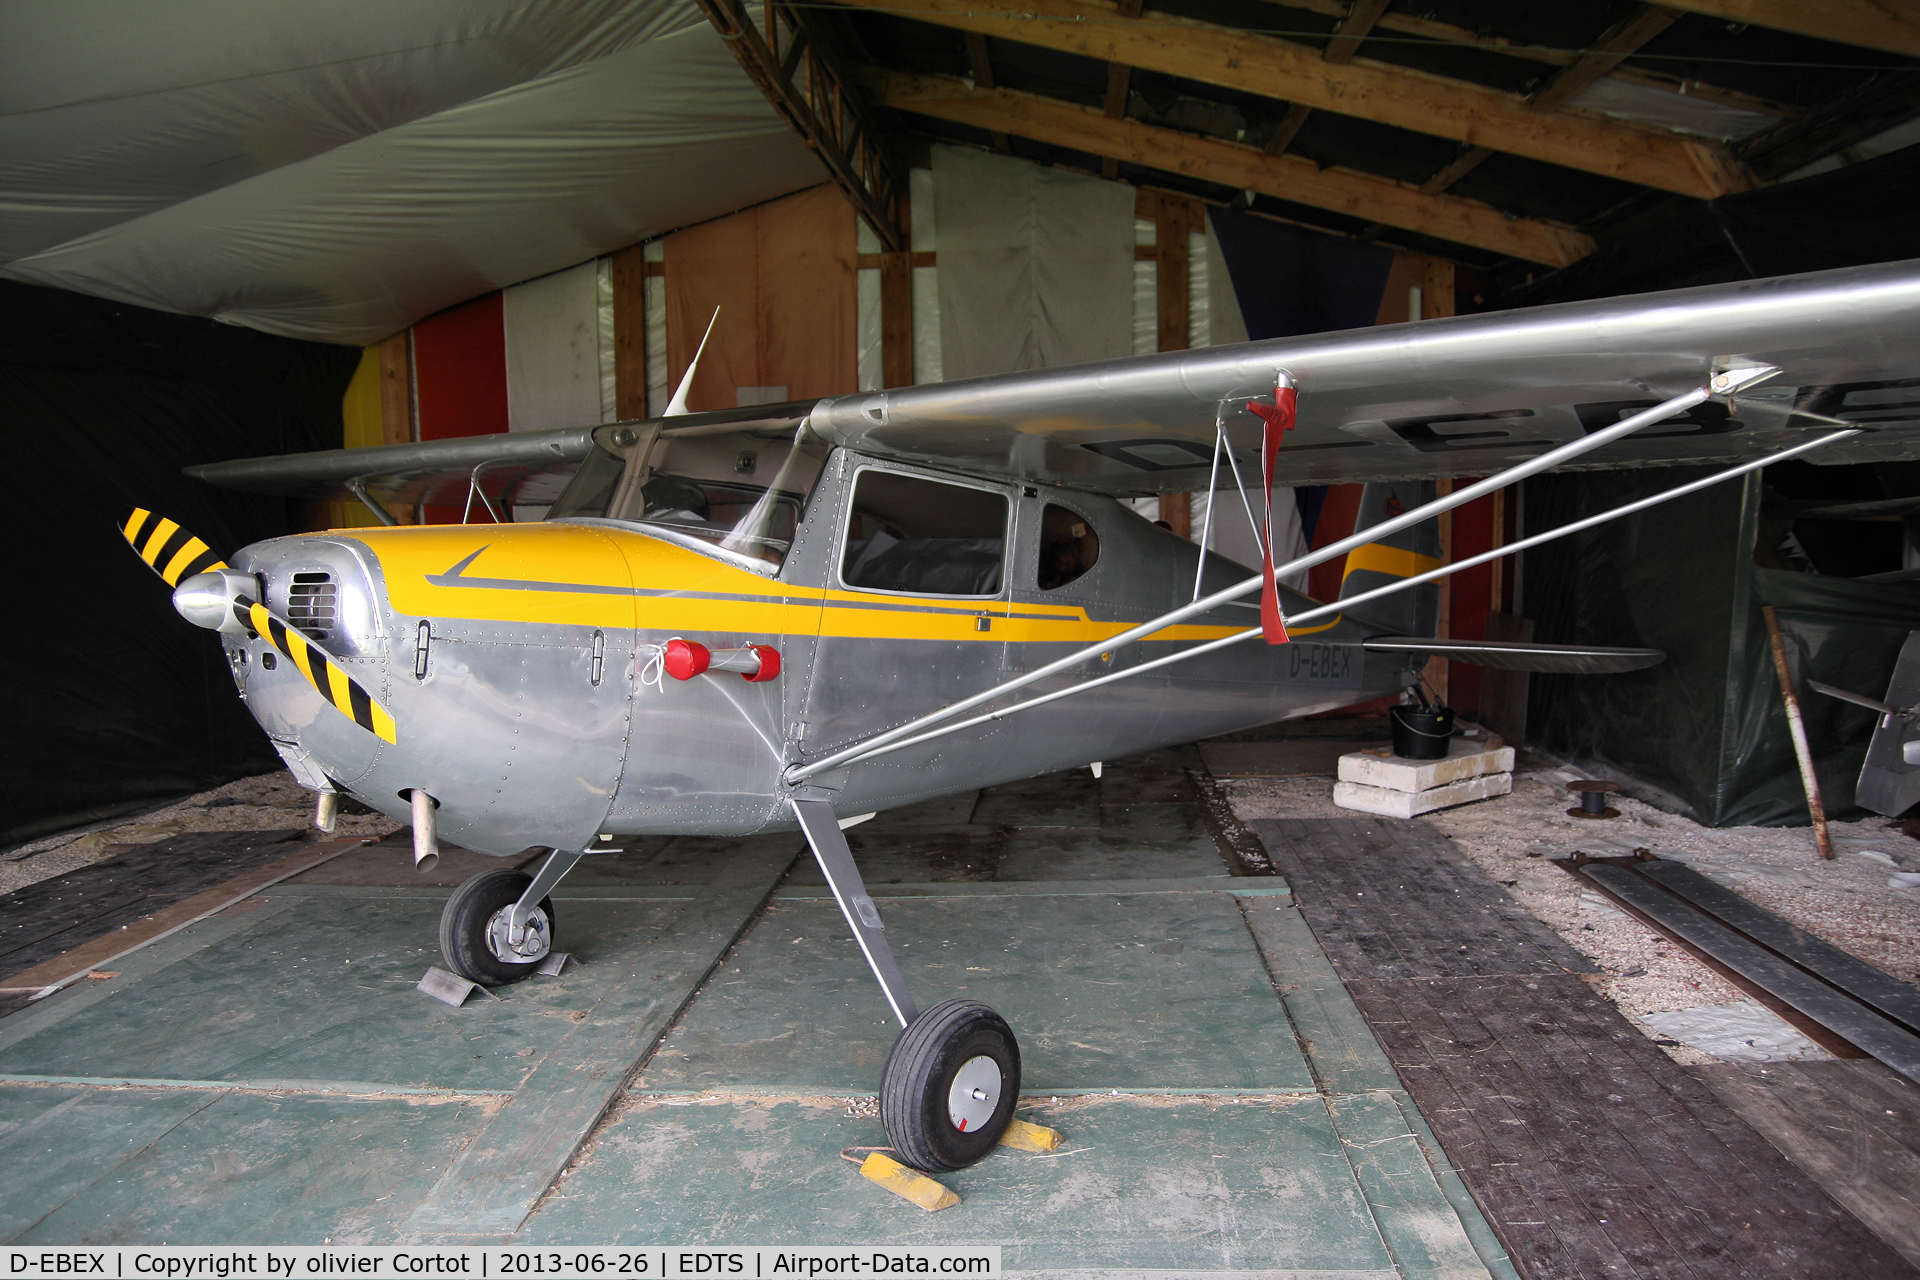 D-EBEX, 1946 Cessna 140 C/N 10300, in a museum - looks flyable